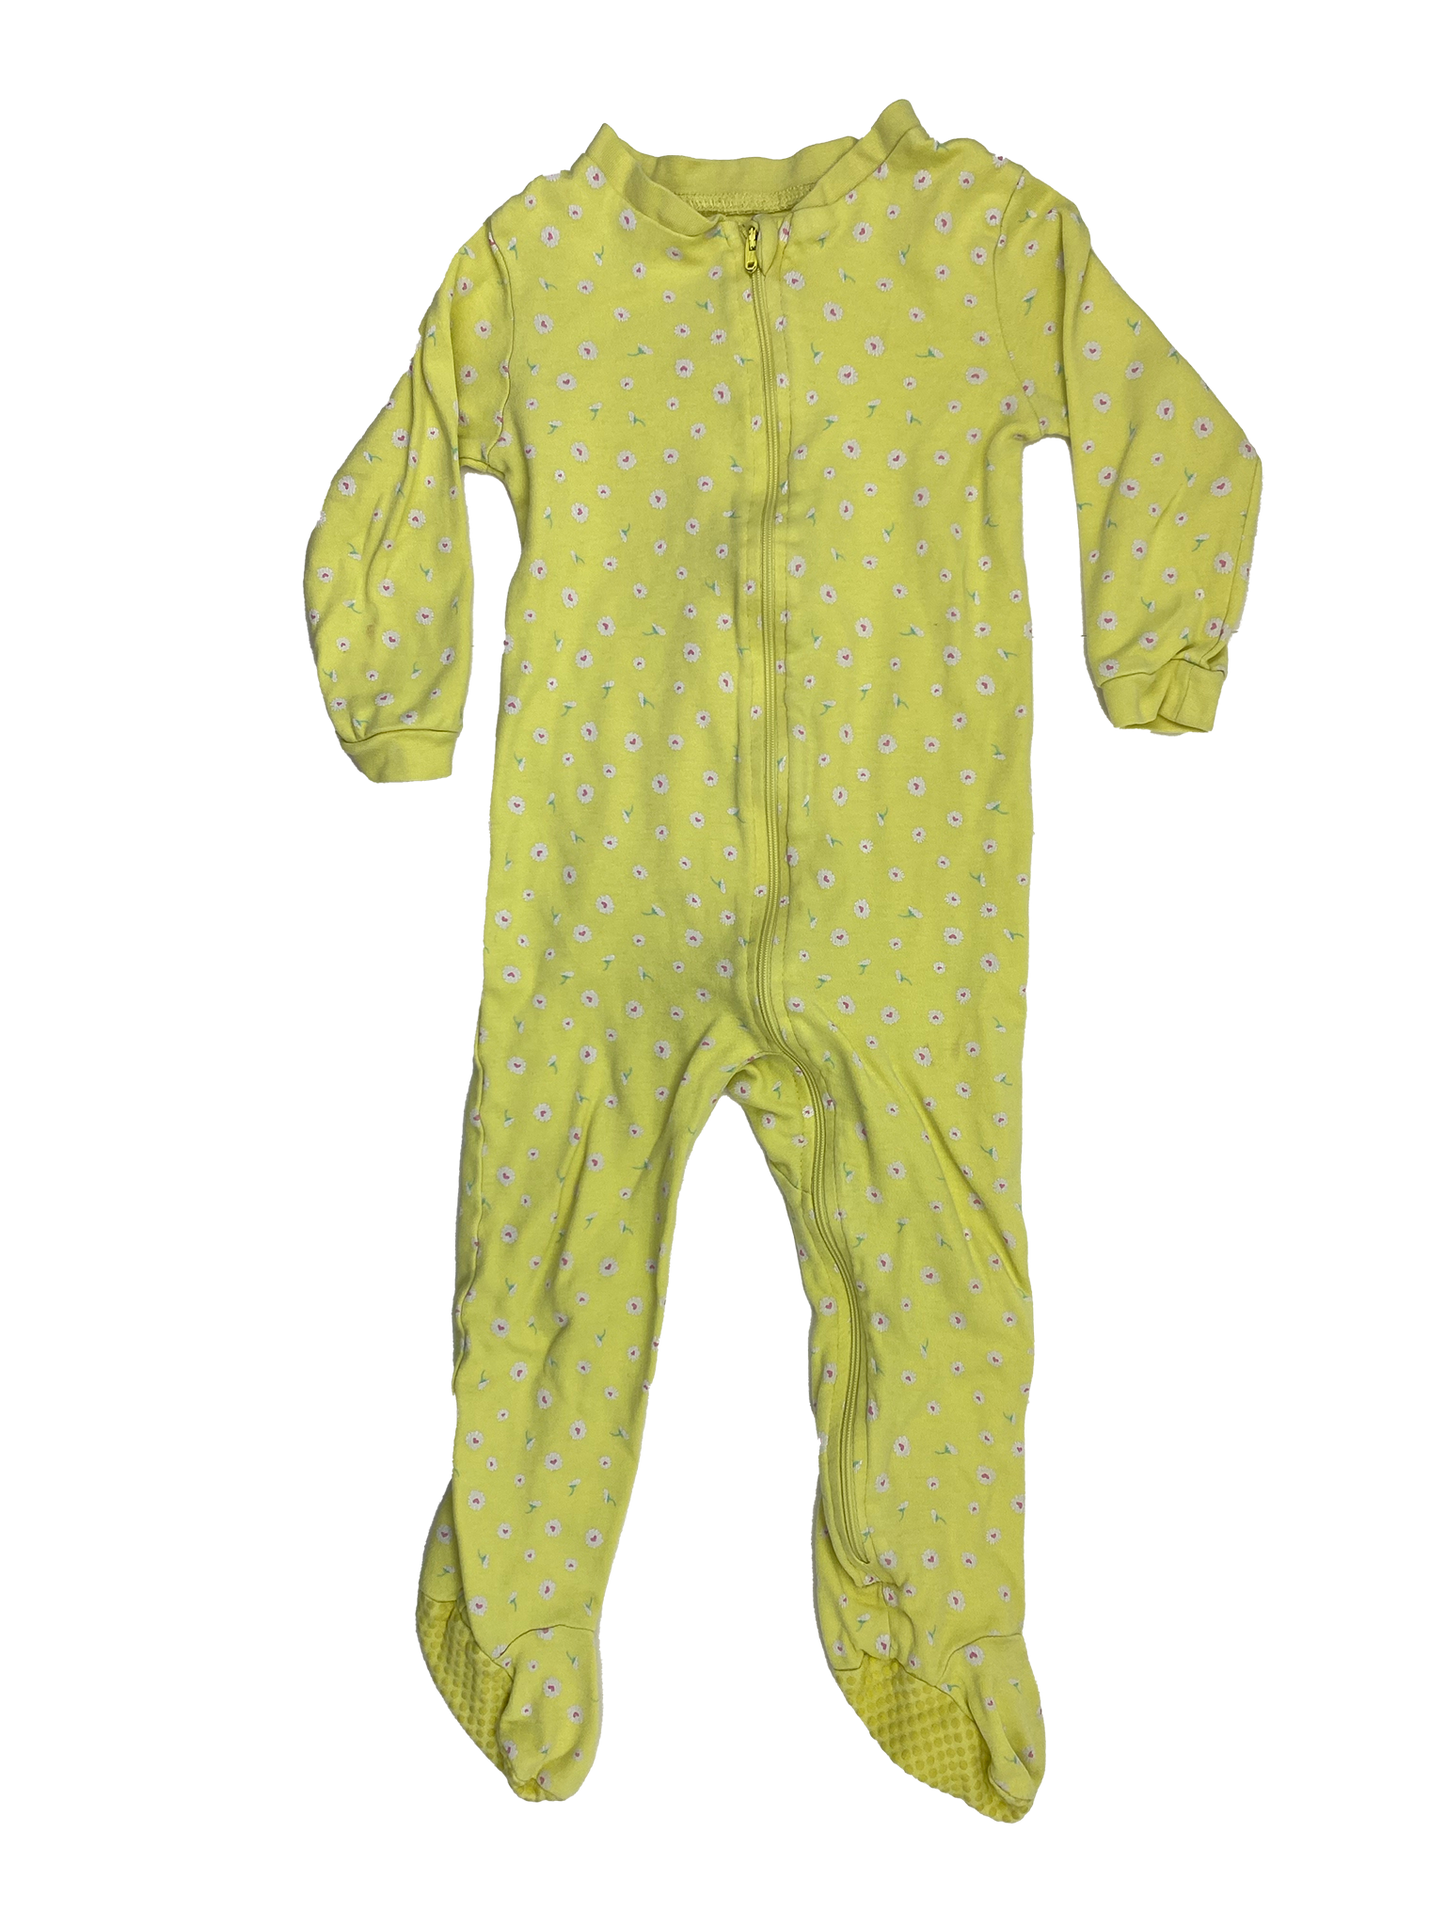 George Yellow Footed Sleeper with Daisies 2T